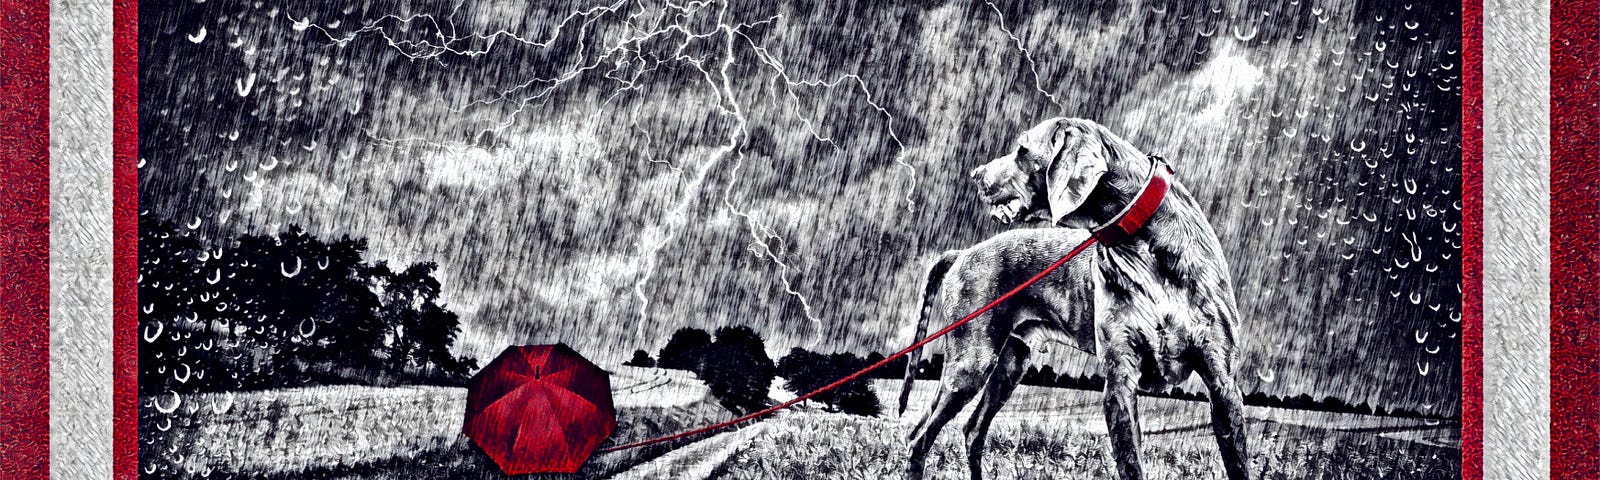 A young girl with a red umbrella walking a giant dog in the rain